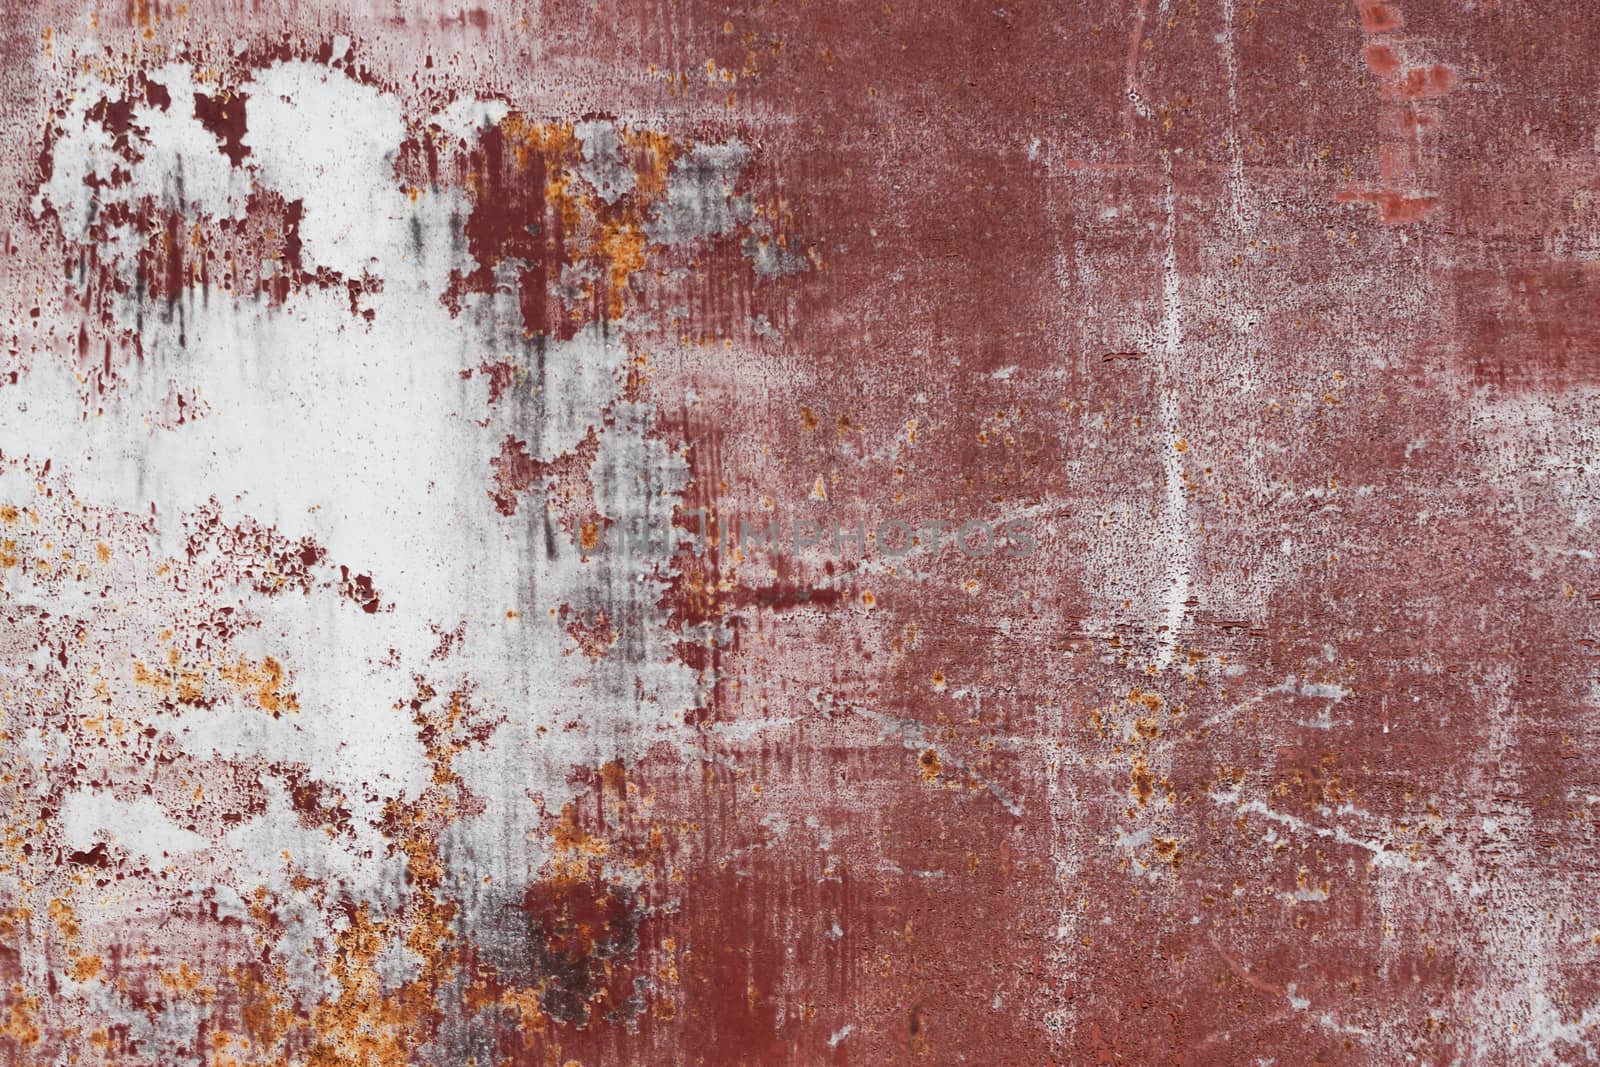 red scratched metal surface with peeling paint